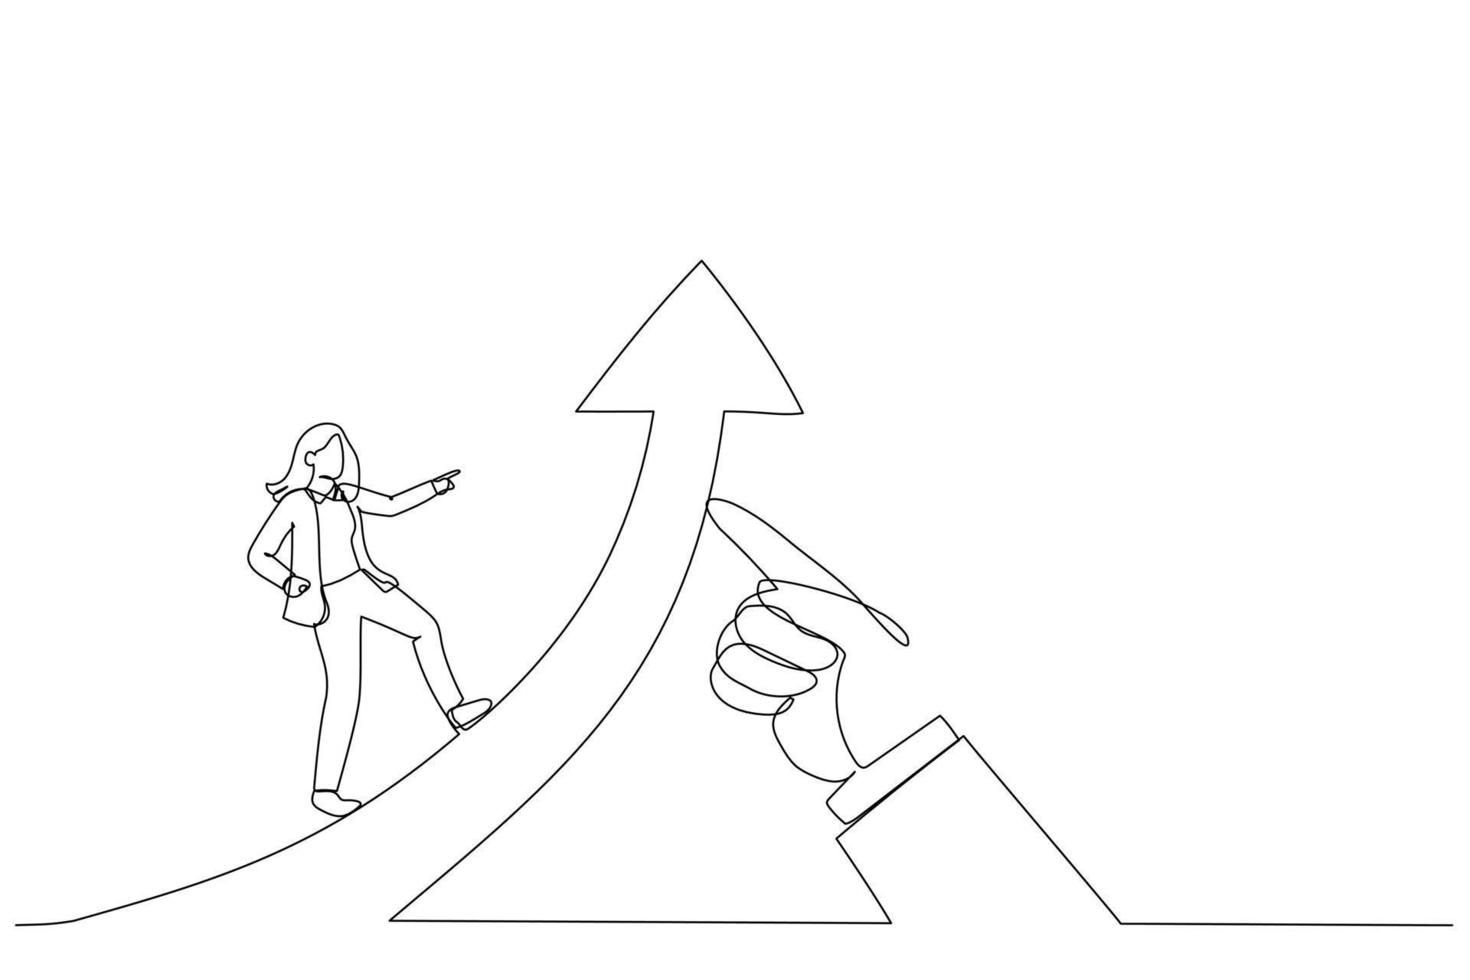 Illustration of businesswoman running on arrow of success raised by giant hand of leader. Metaphor for business success moving forward leadership. Single line art style vector